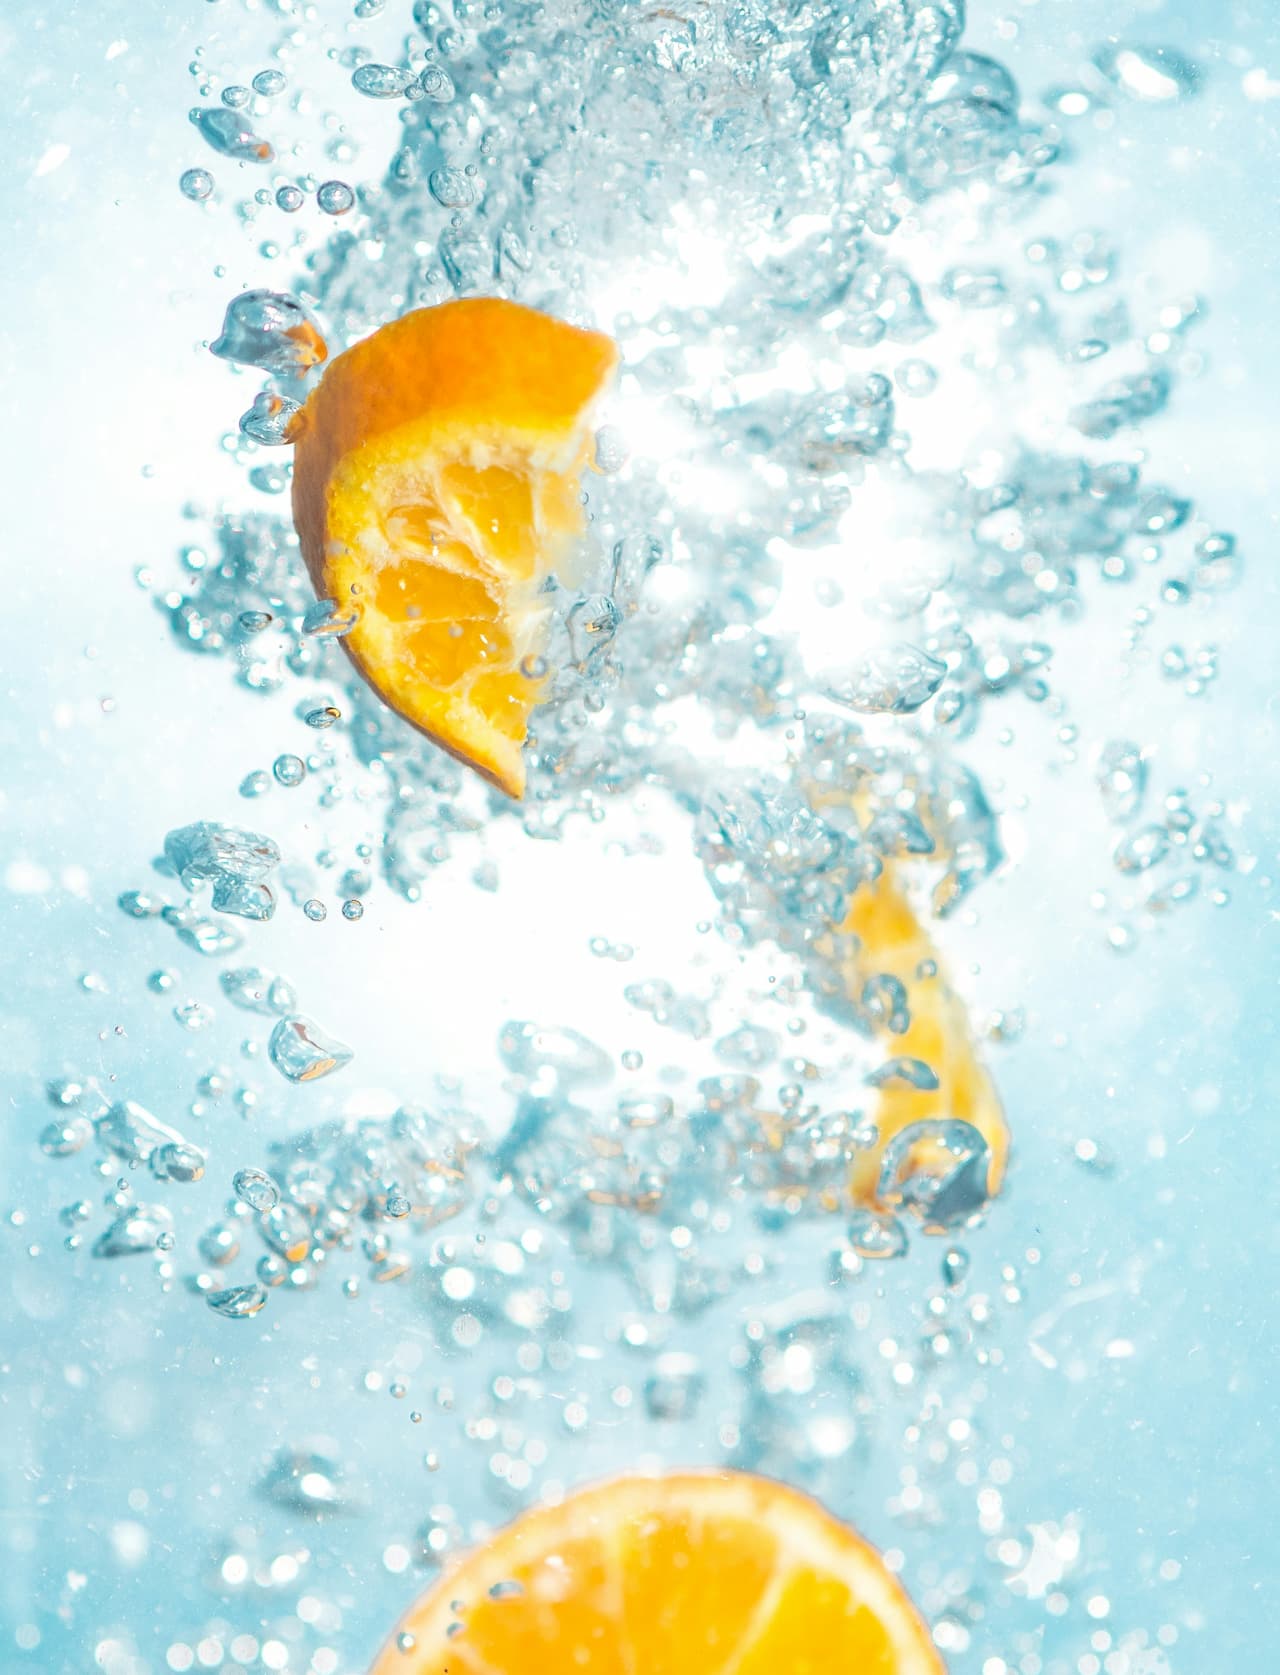 A cut orange being dropped in refreshing cold water